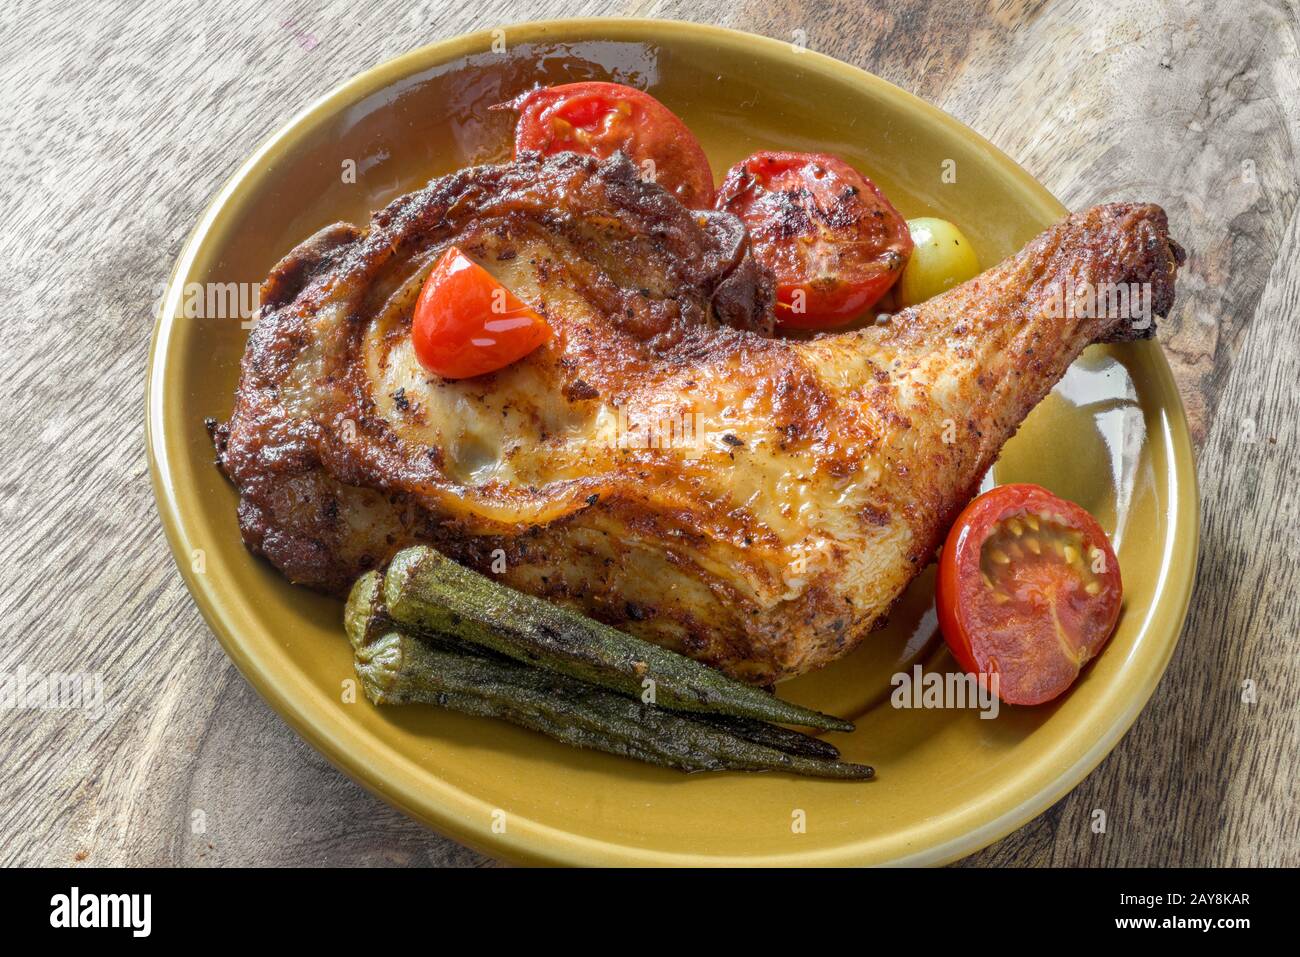 Roasted chicken drumstick Stock Photo